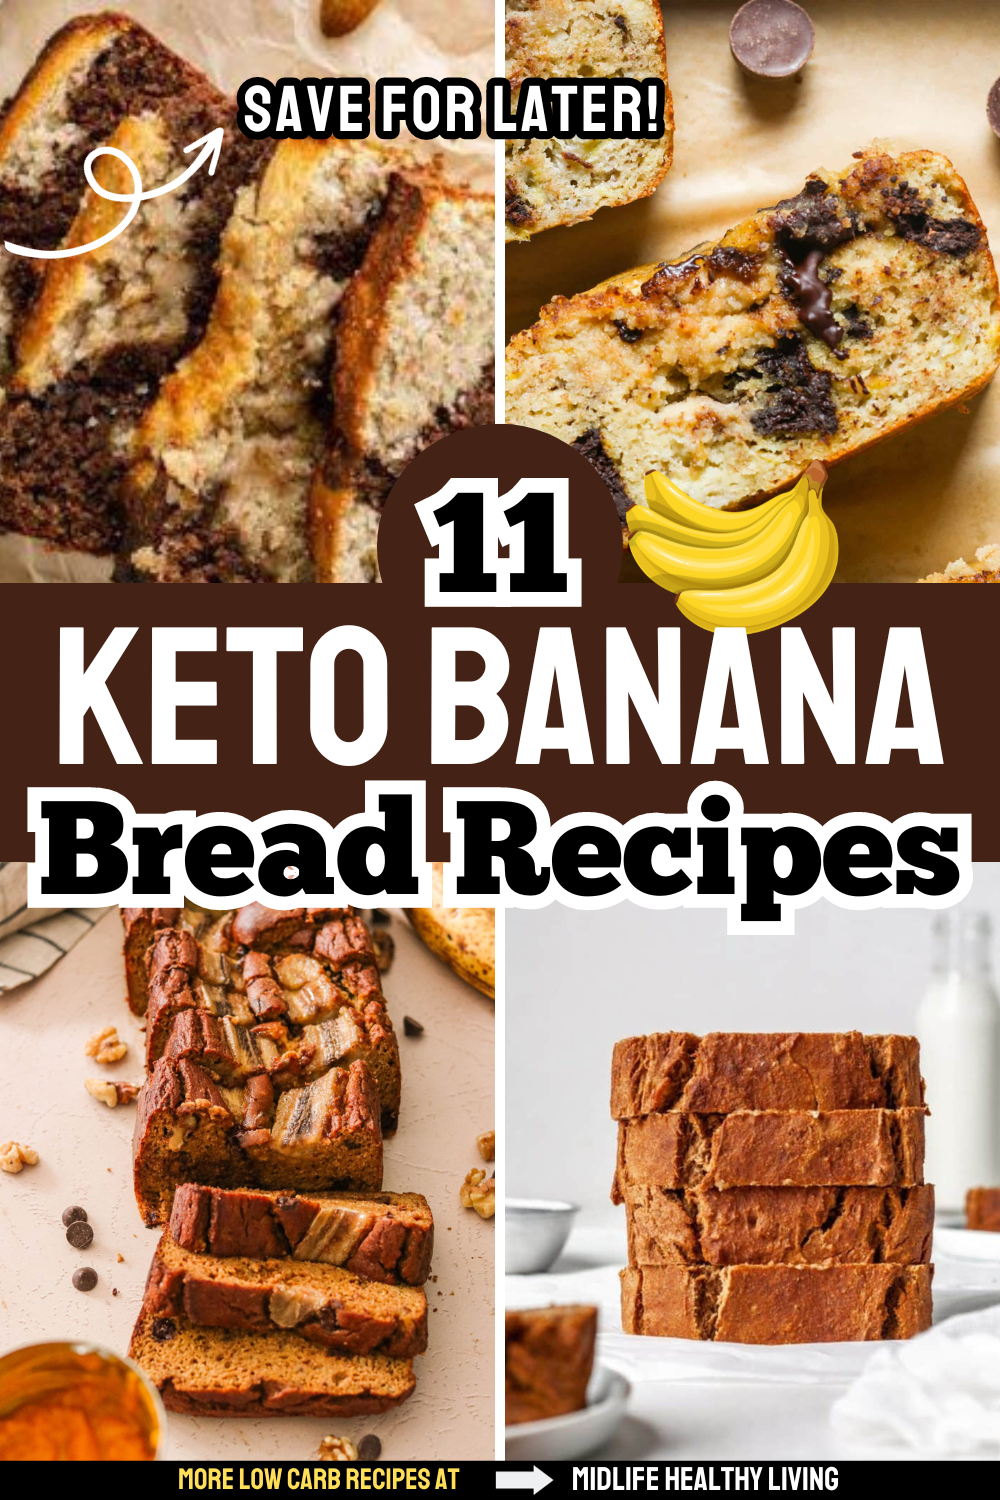 low carb banana bread recipes to try